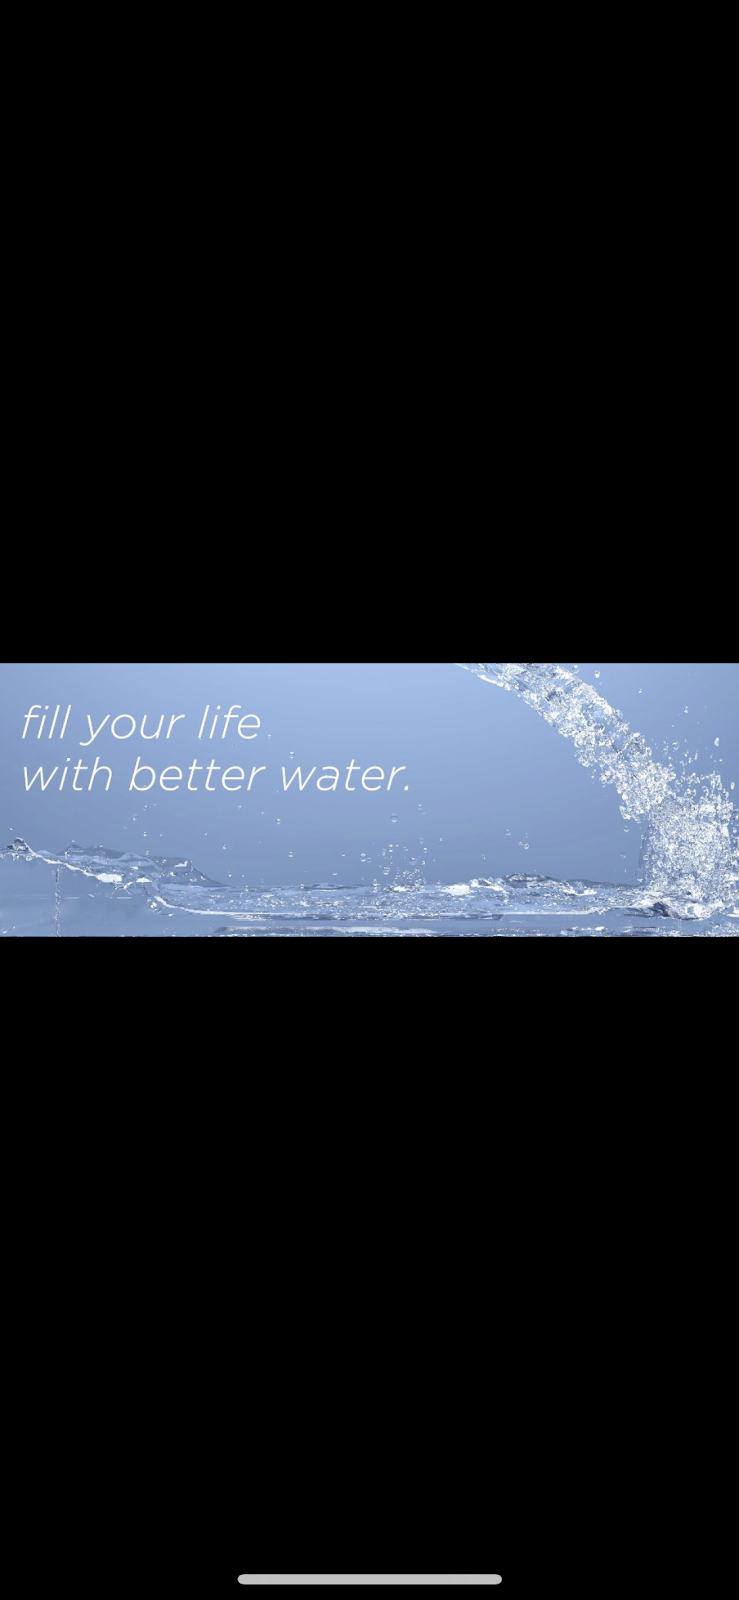 Premier Water Systems | Headquarters, 591 Providence Hwy, Walpole, MA 02081 | Phone: (508) 850-9099